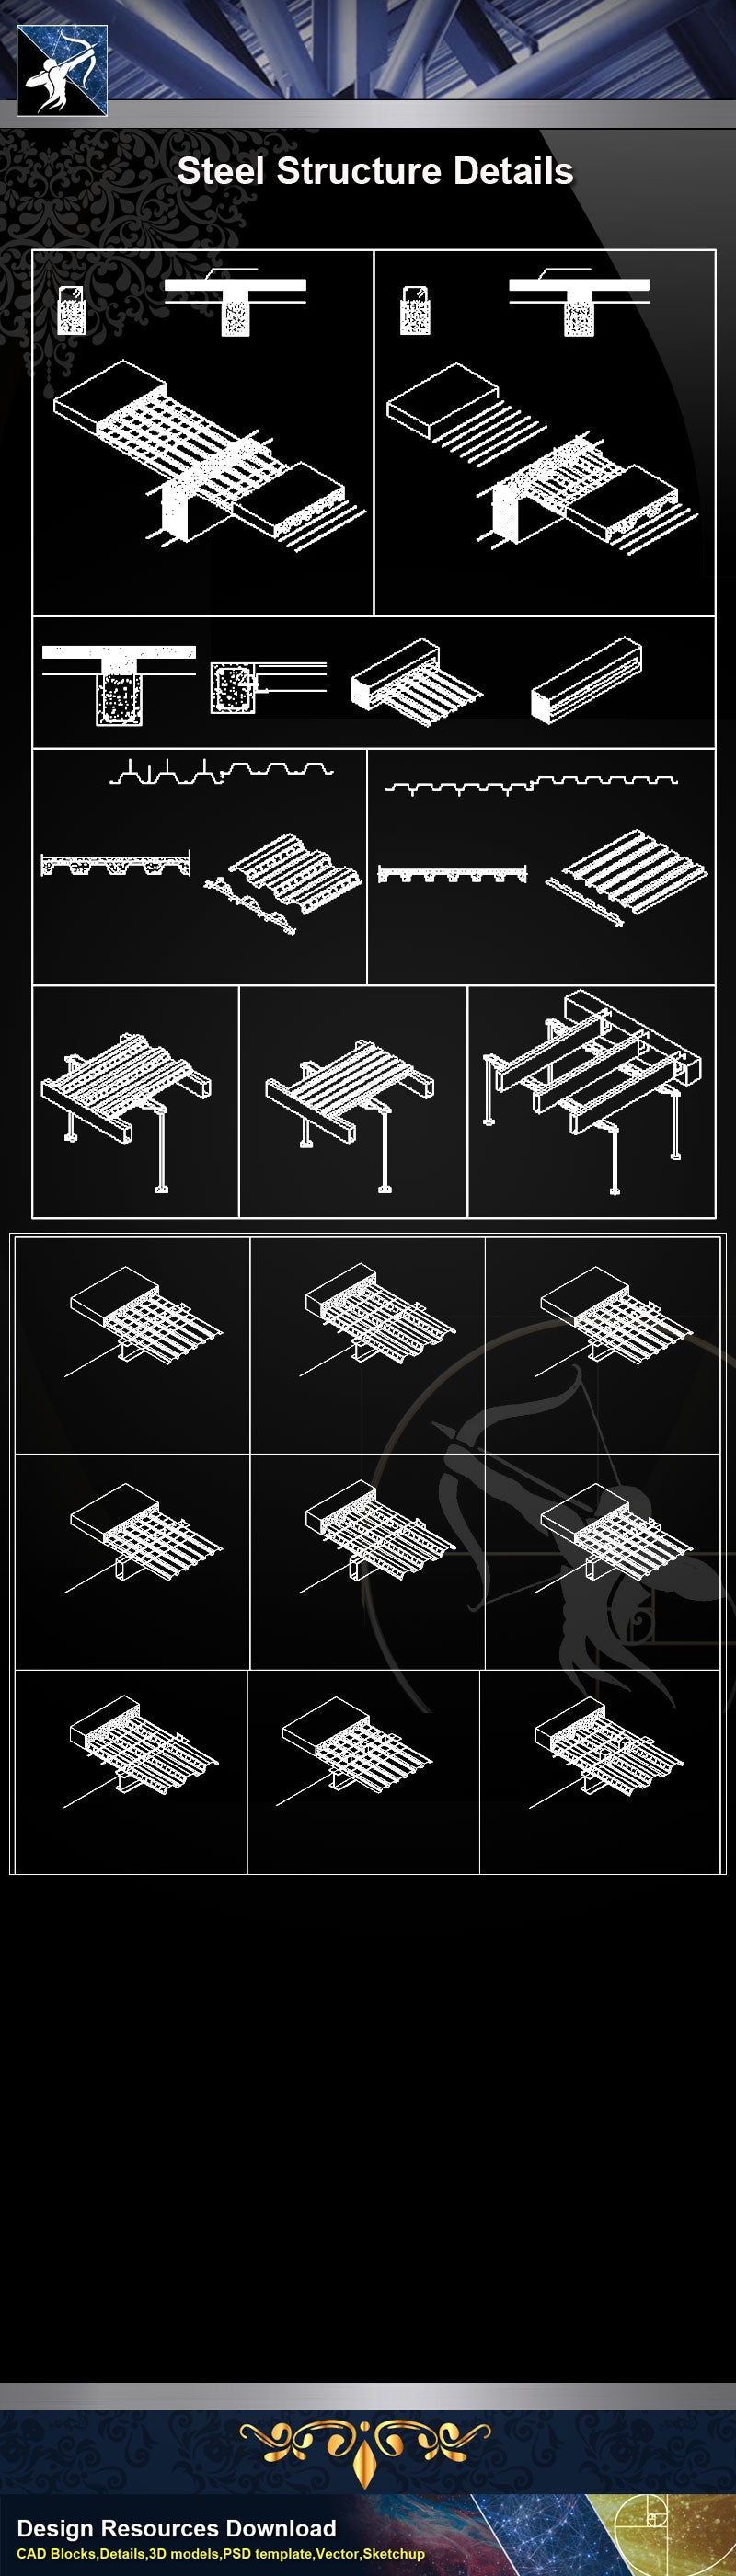 【Steel Structure Details】Steel Structure Details Collection V.5